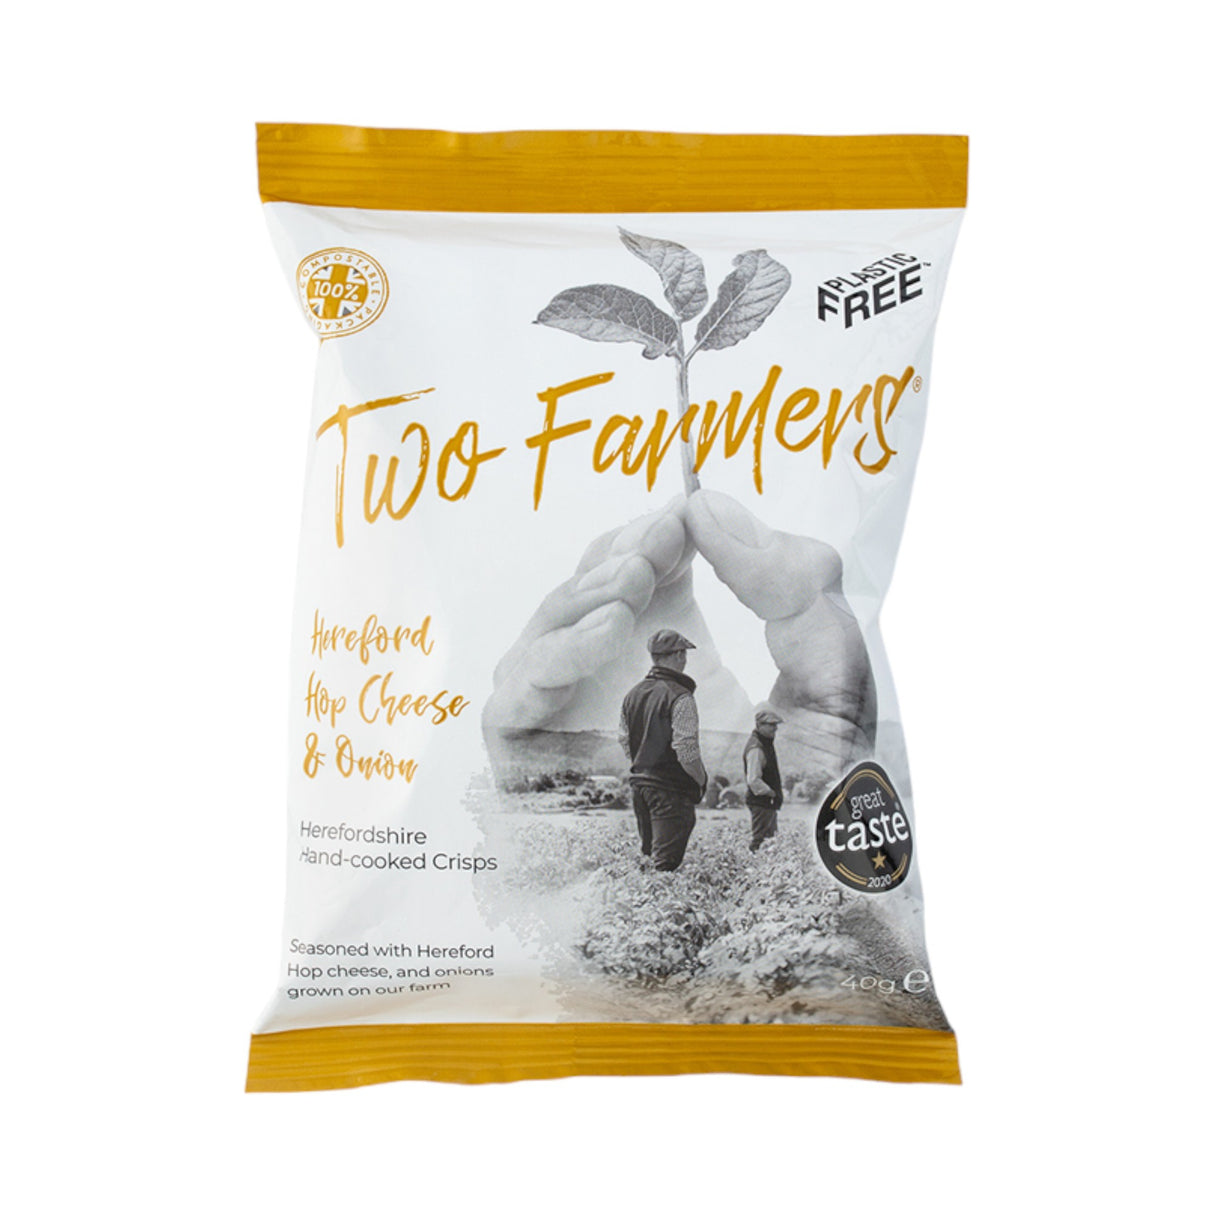 Two Farmers - Hand Cooked Hereford Hop Cheese & Onion Crisps 40g